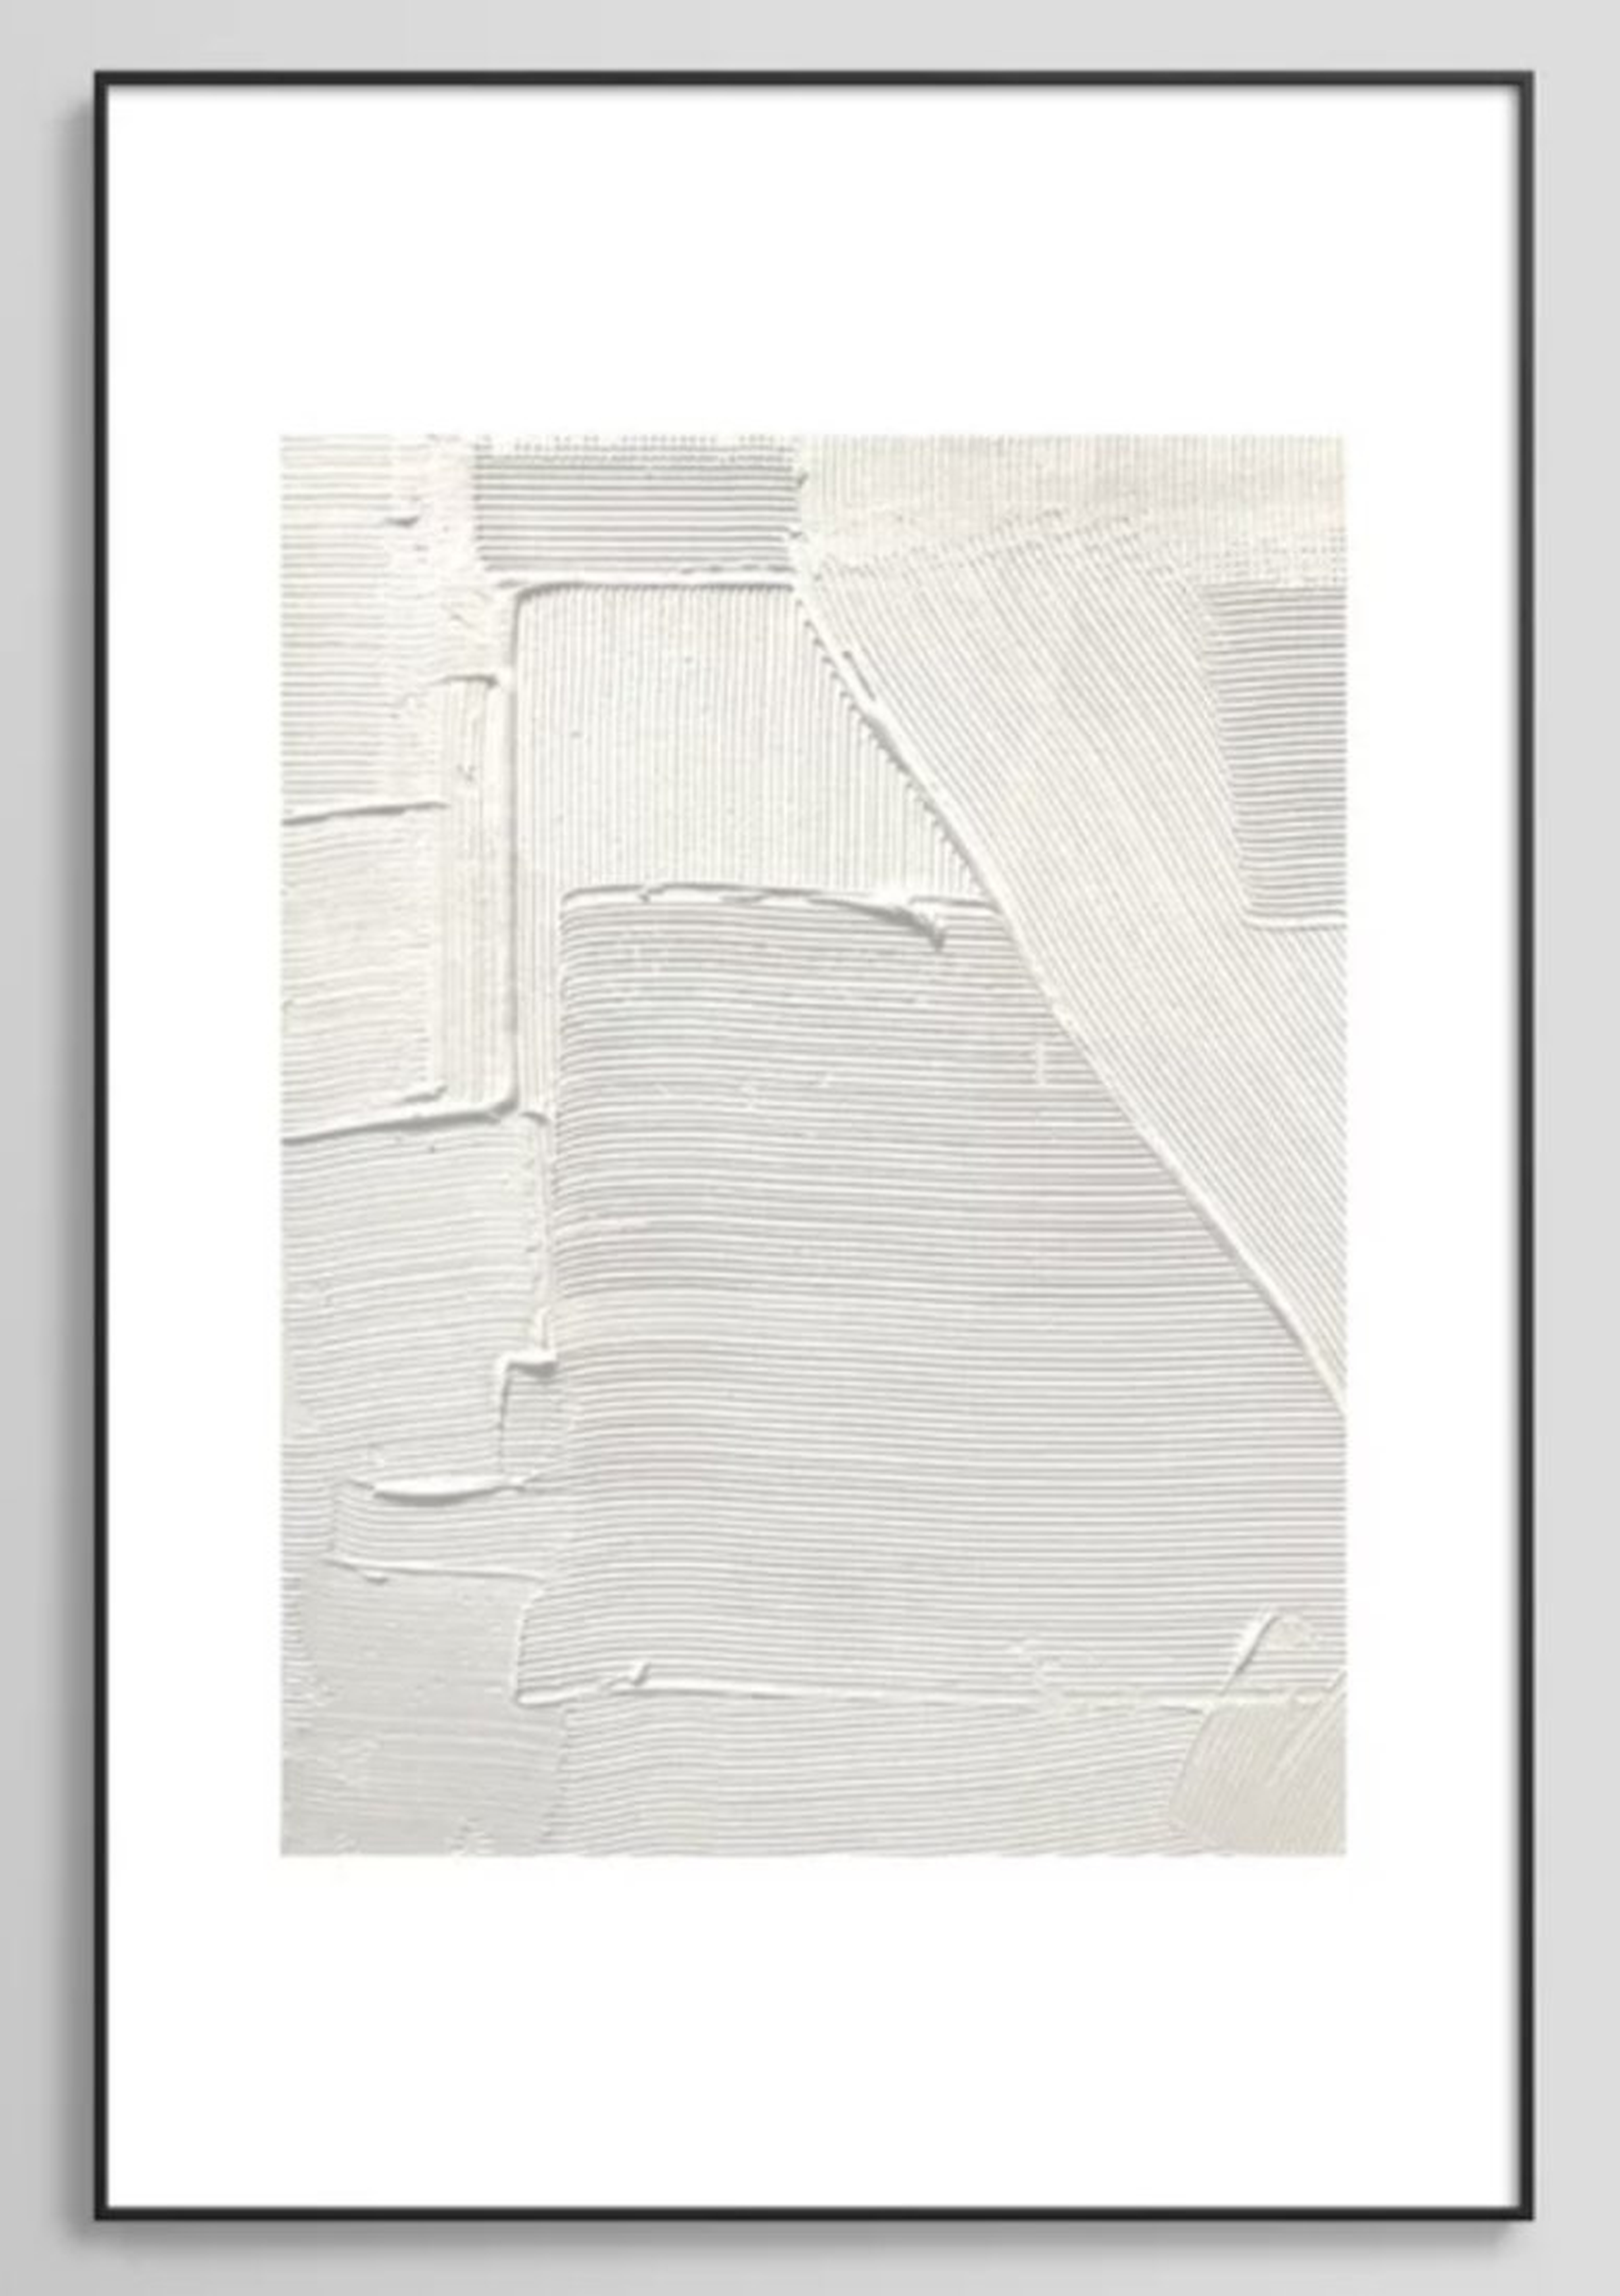 Relief [2]: An Abstract, Framed Art Print, 24" x 36" - Society6